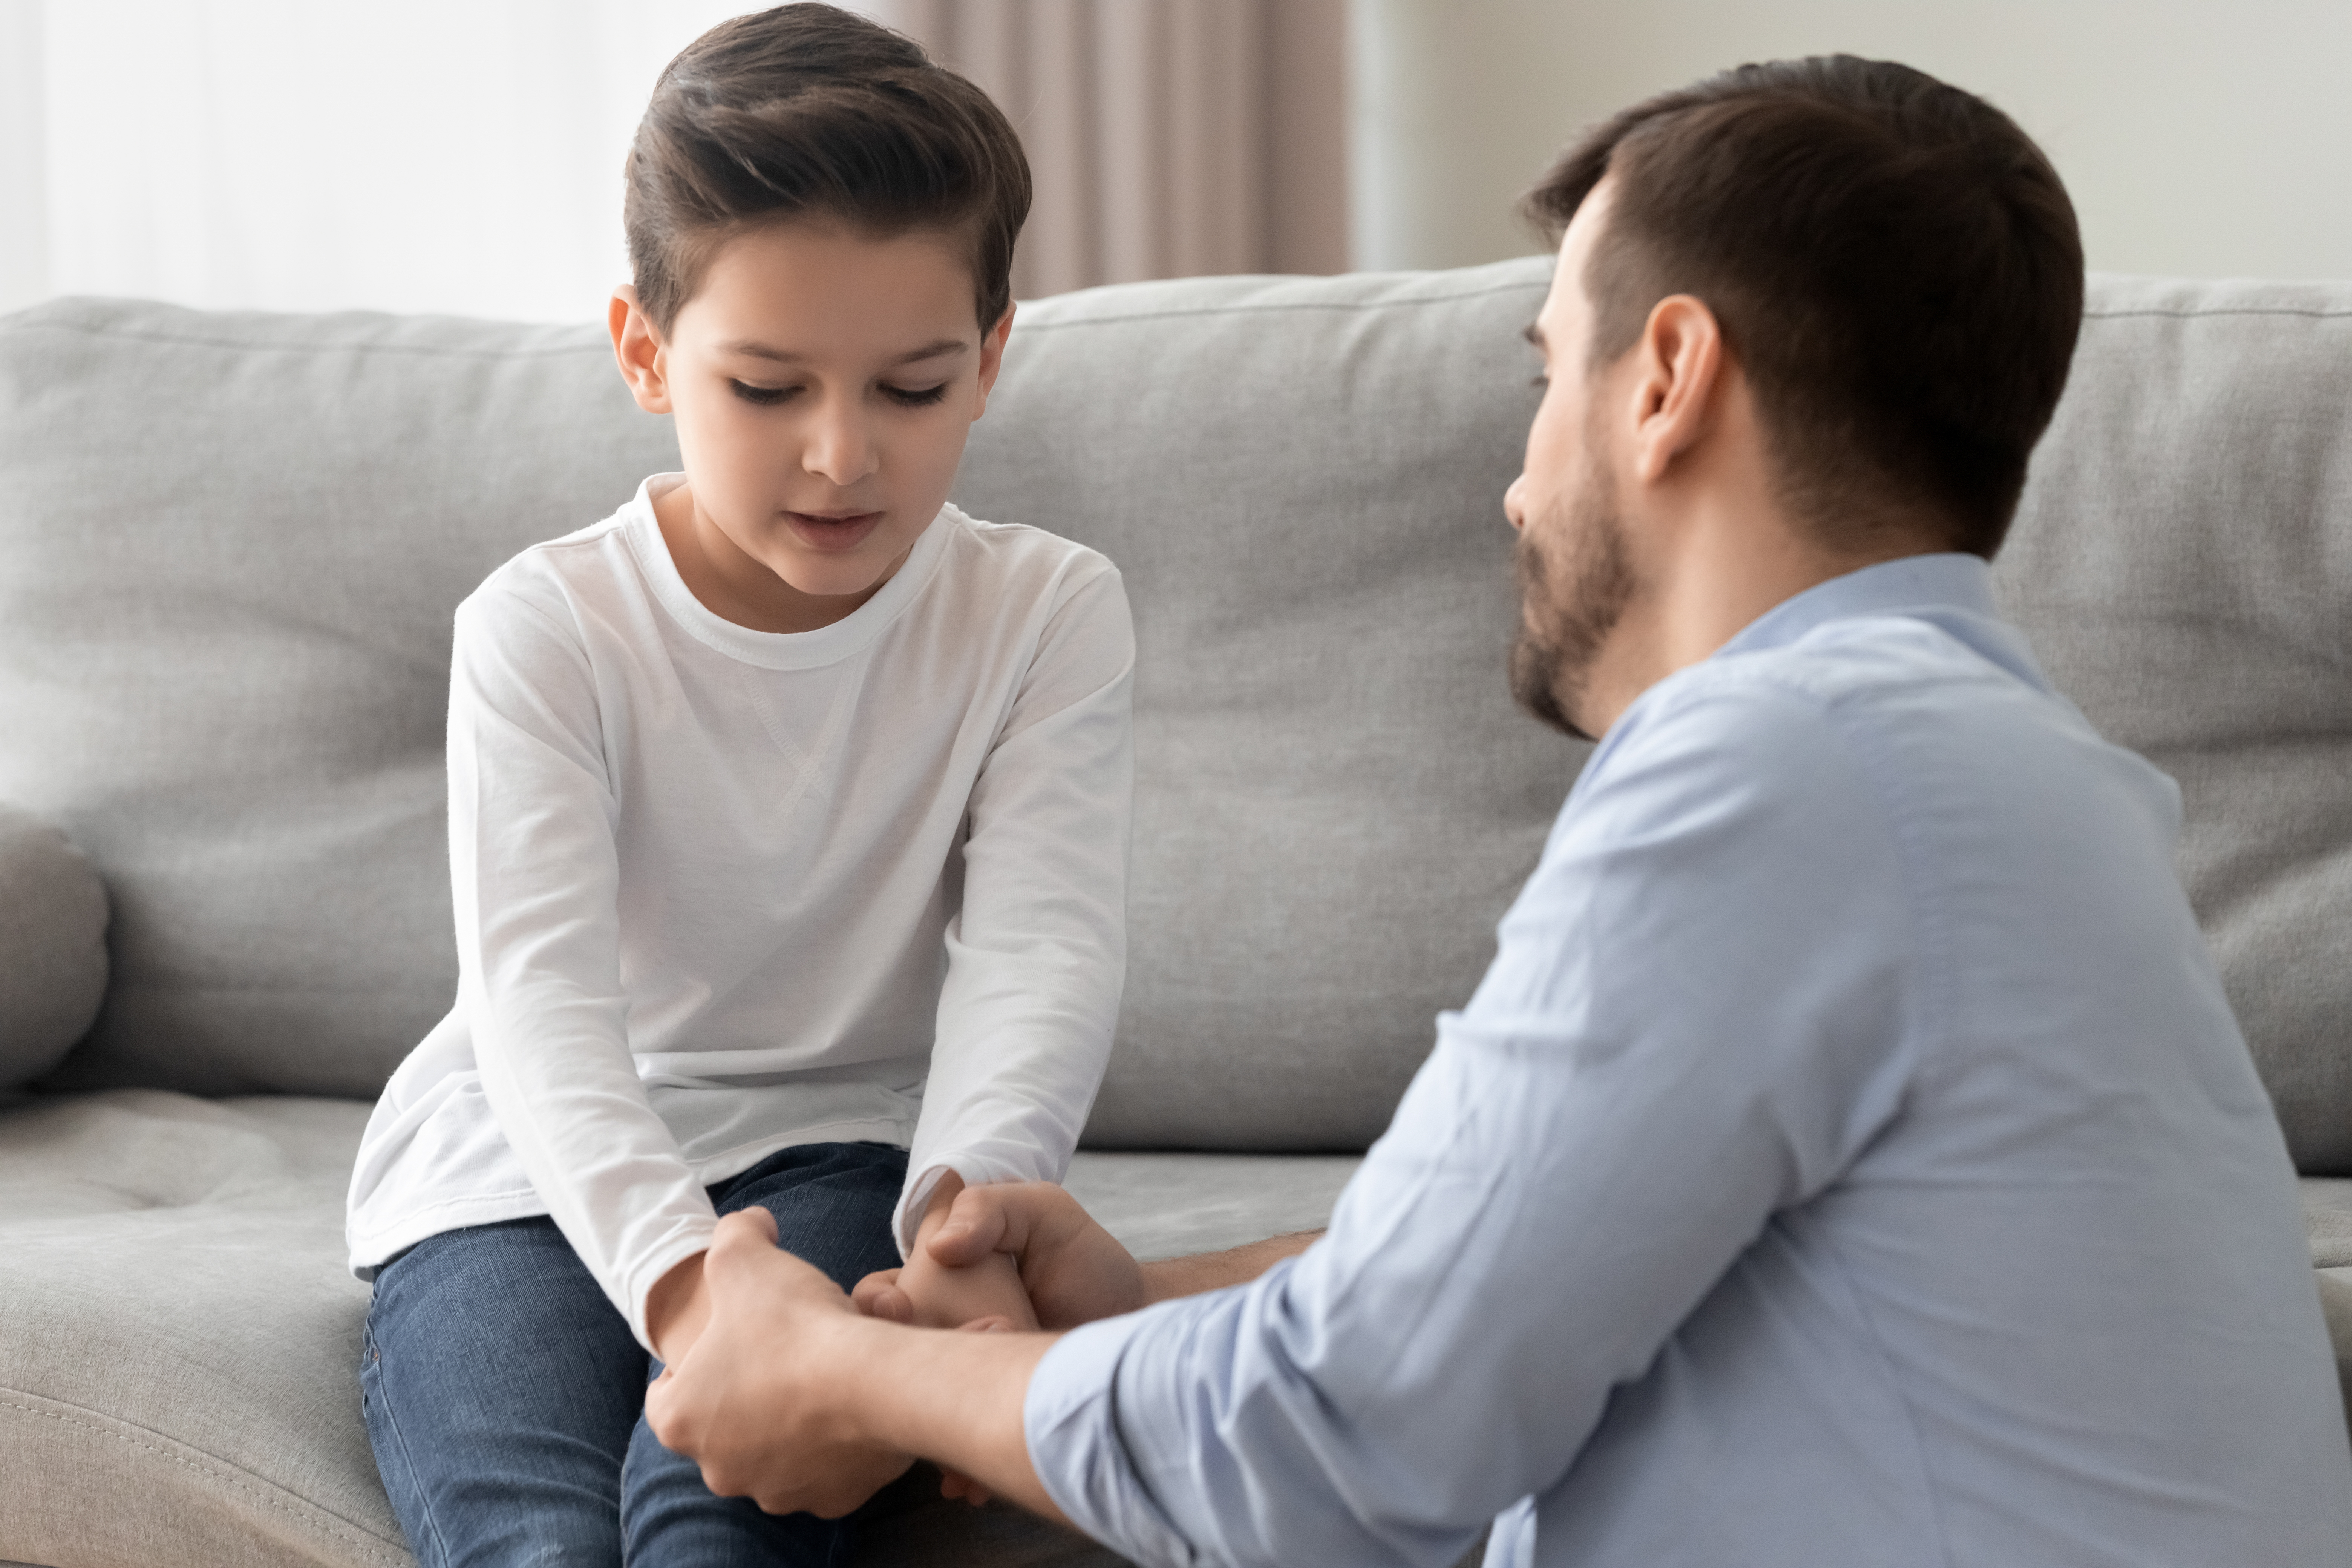 Sad boy is talking to his father | Source: Shutterstock.com